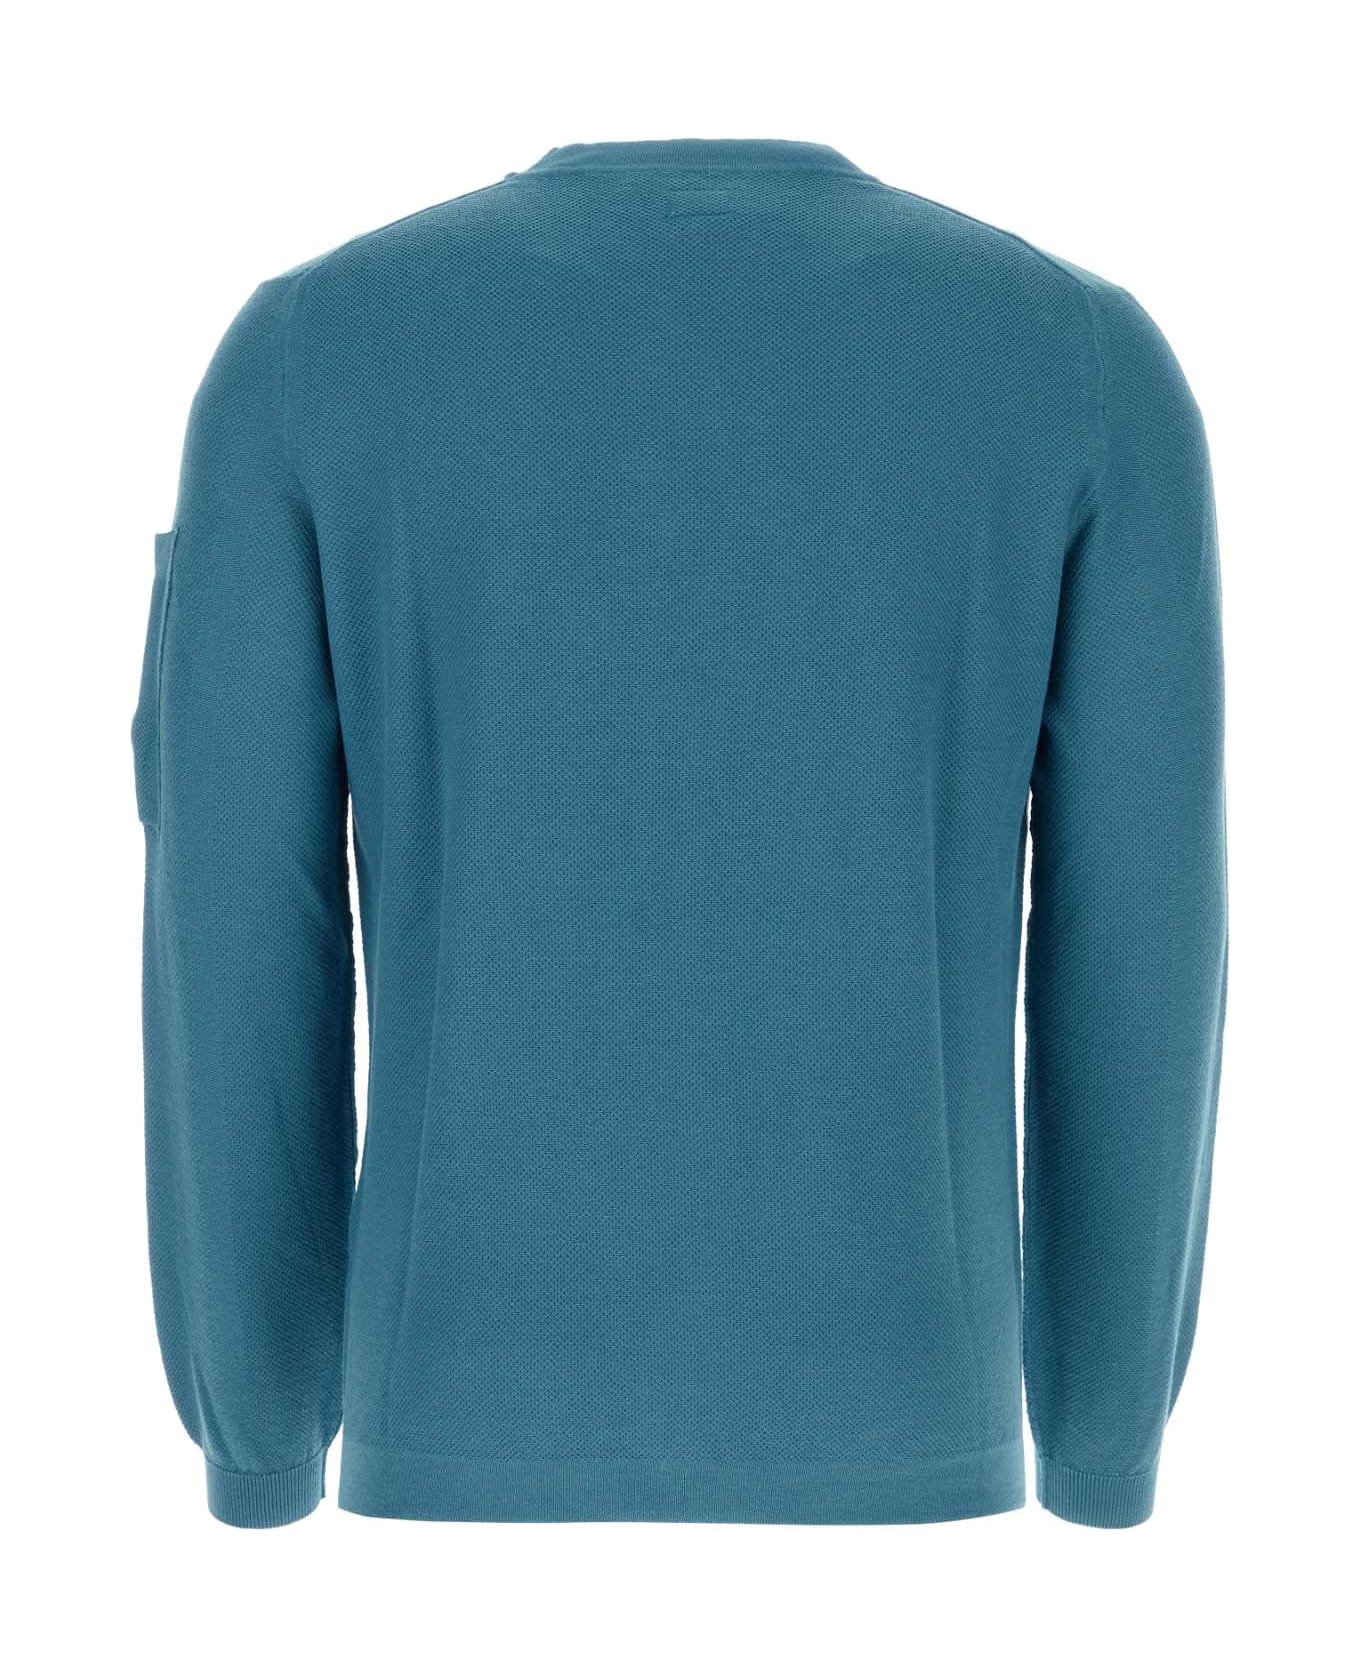 C.P. Company Air Force Blue Cotton Sweater - INKBLUE